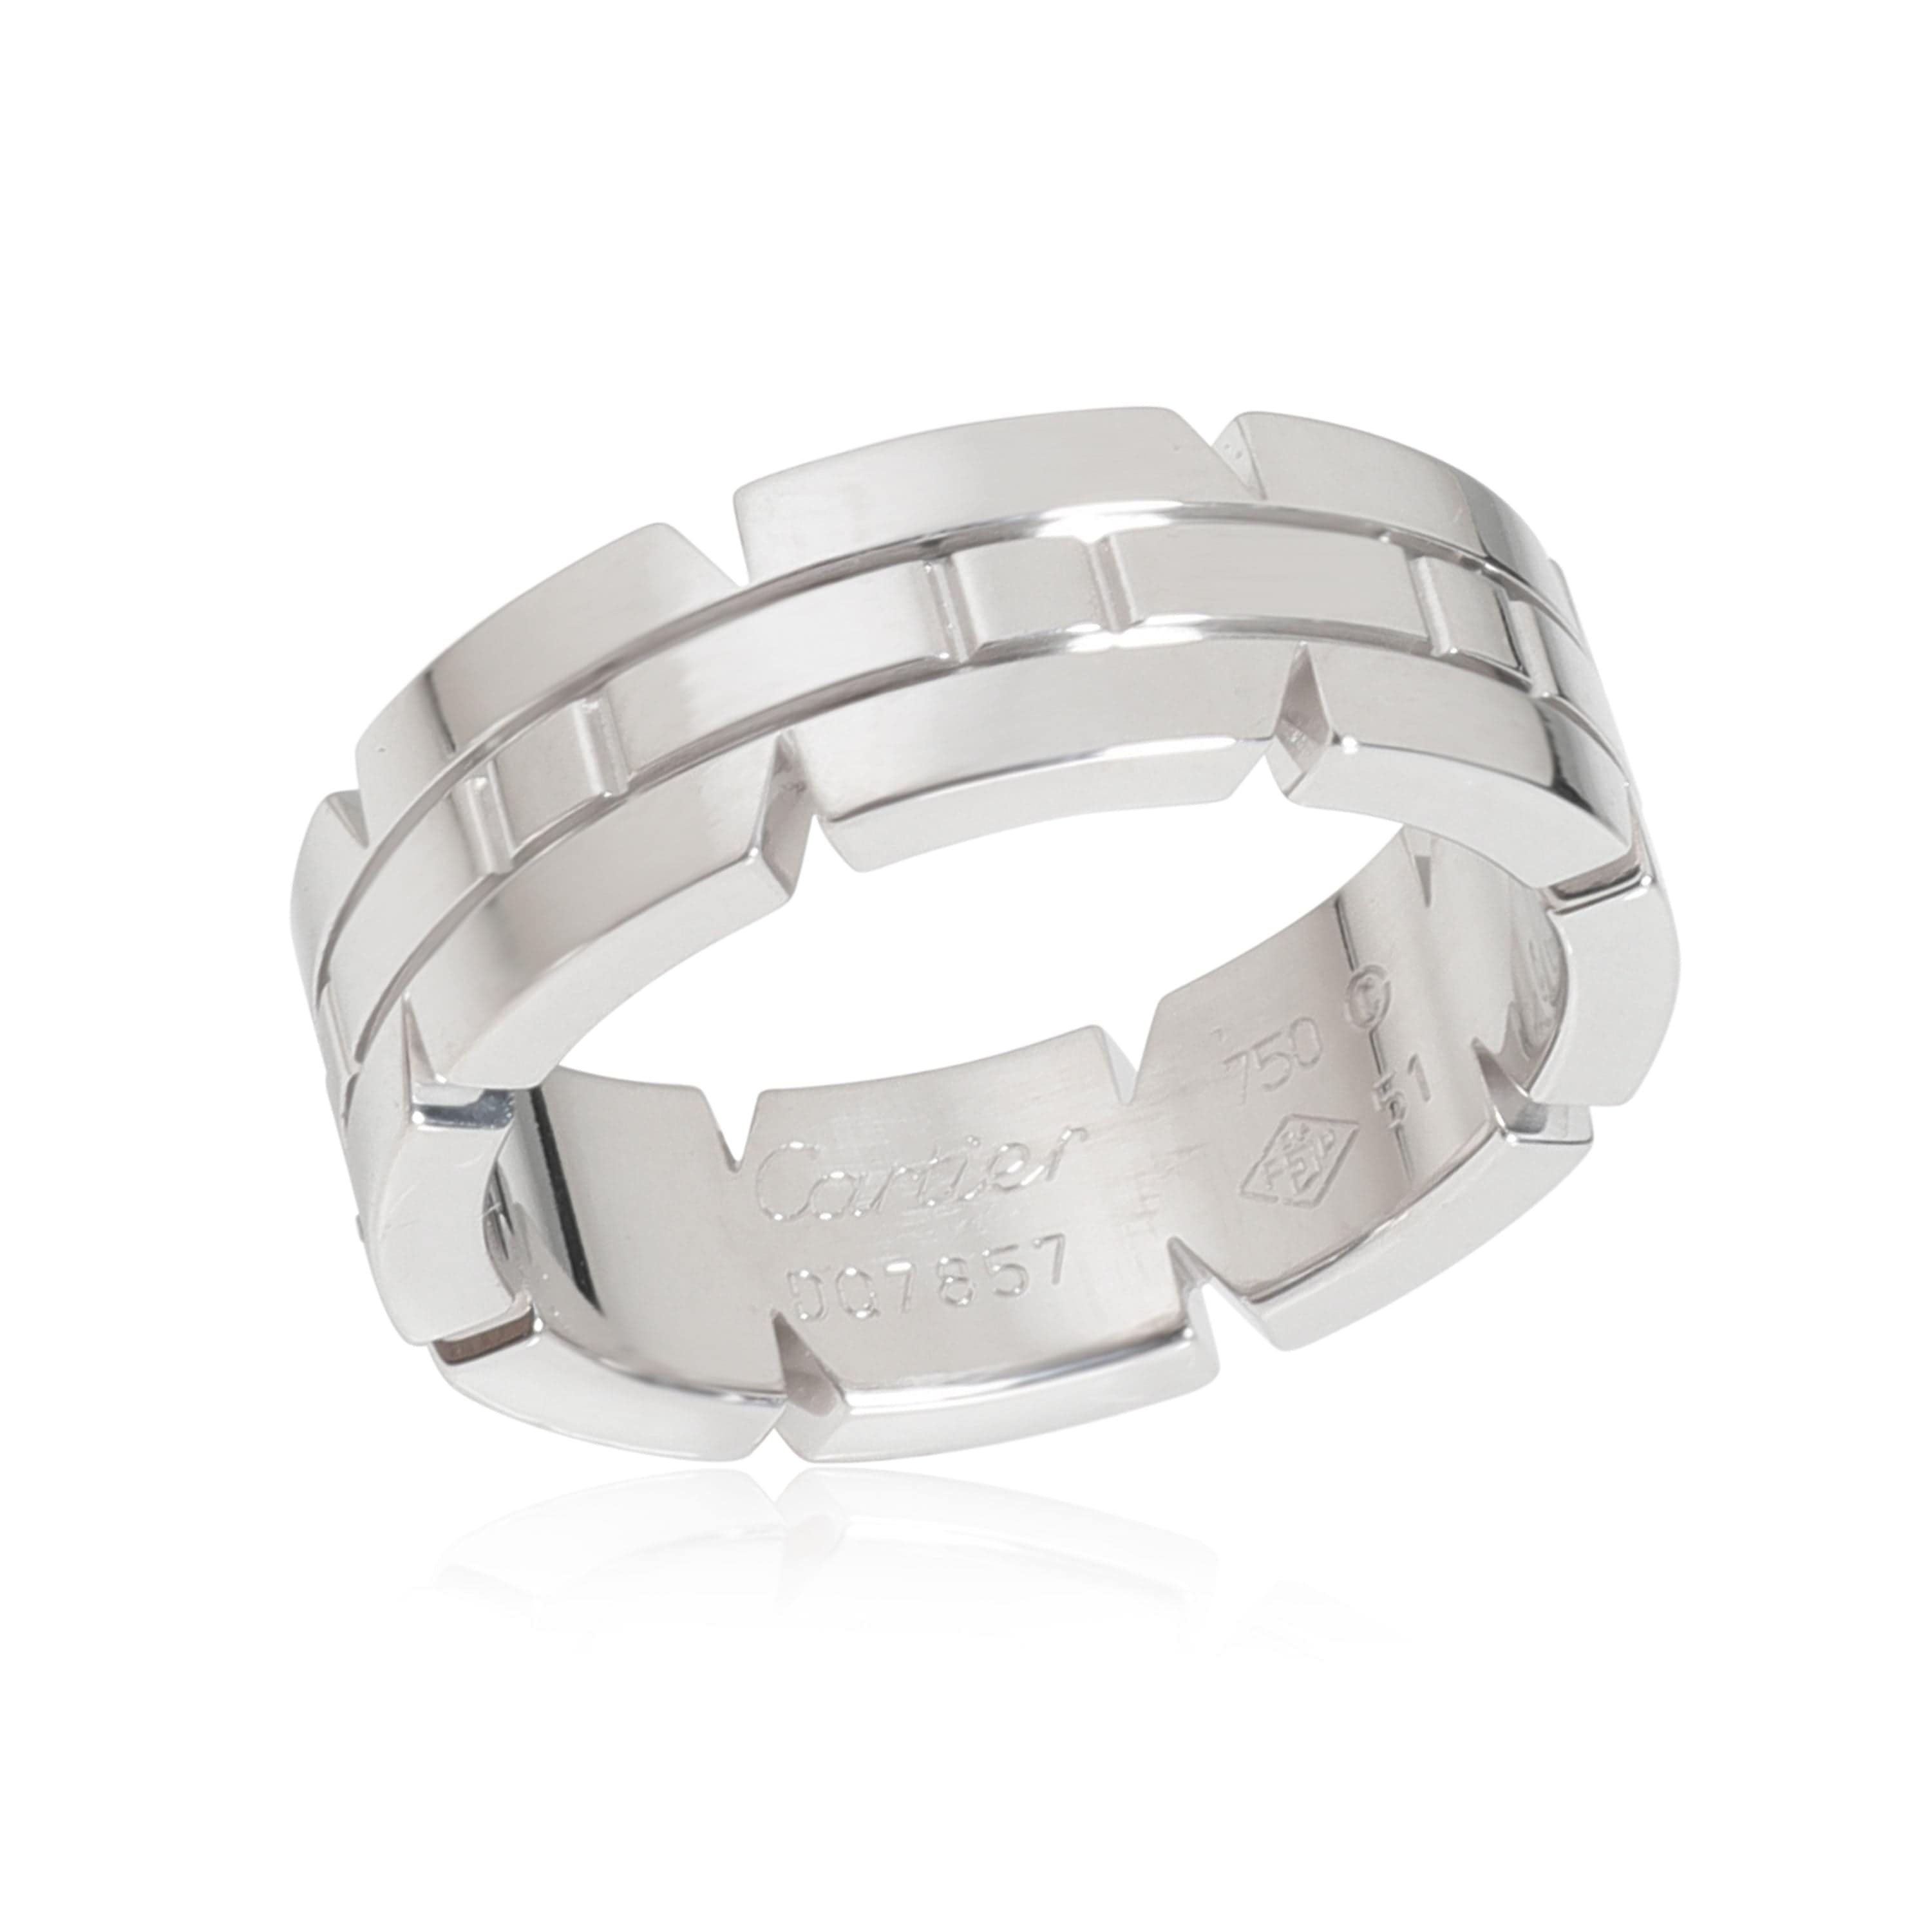 Cartier Cartier Tank Ring in 18k White Gold